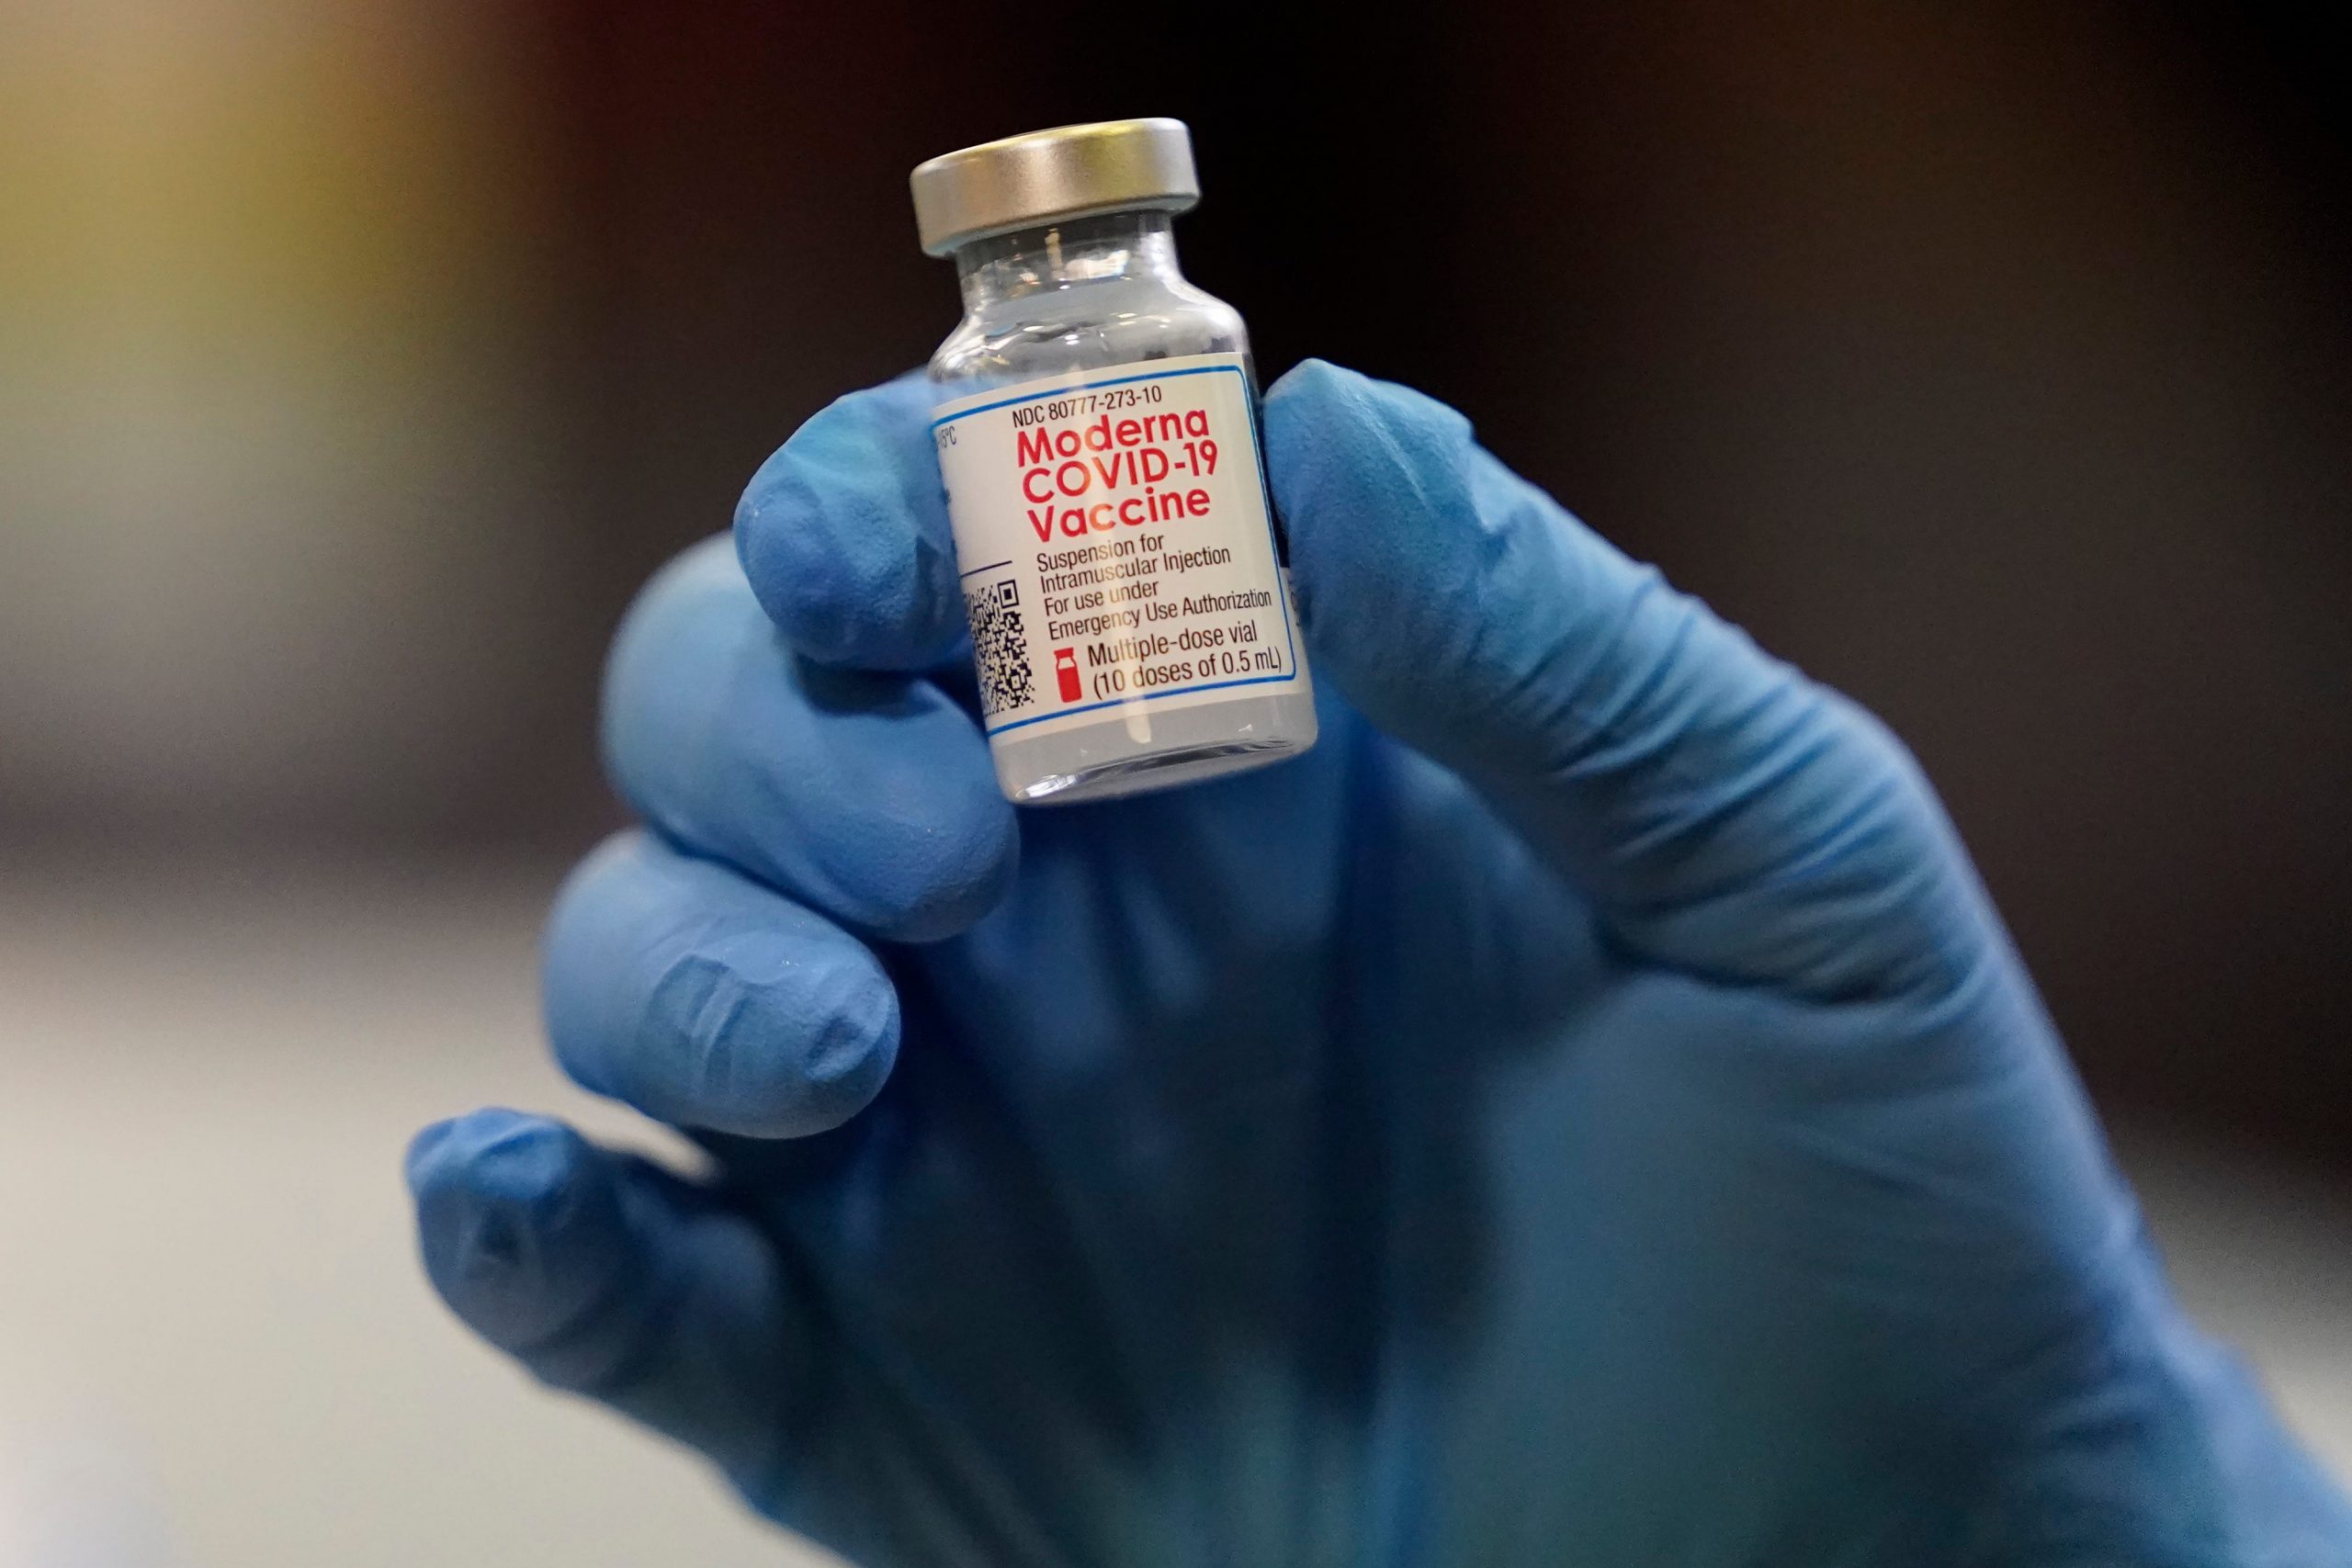 A glass vial of Moderna COVID-19 Vaccine held by a hand in a blue surgical glove